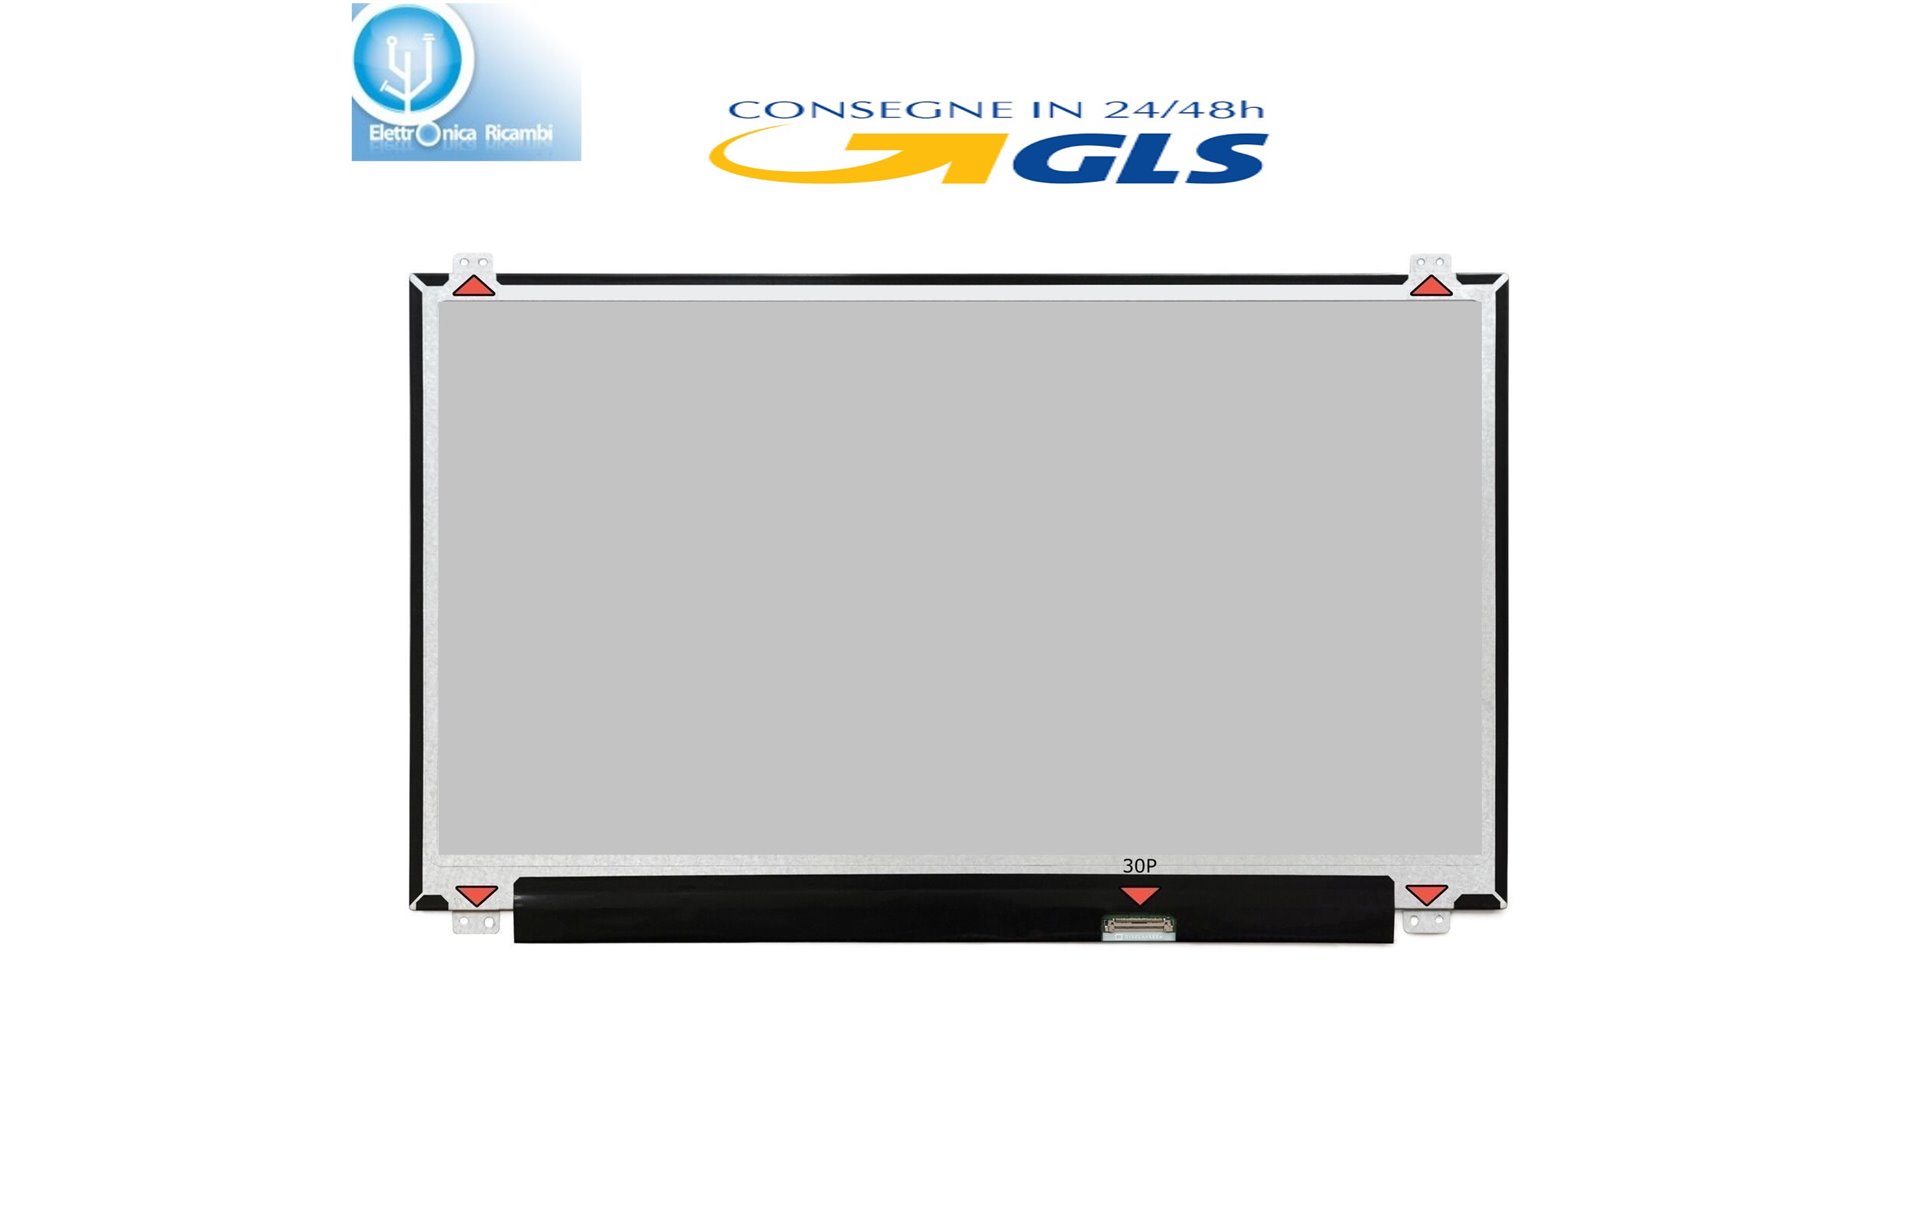 DISPLAY LCD PACKARDBELL EASYNOTE ENTG83BA SERIES 15.6 1366x768 LED 30 pin